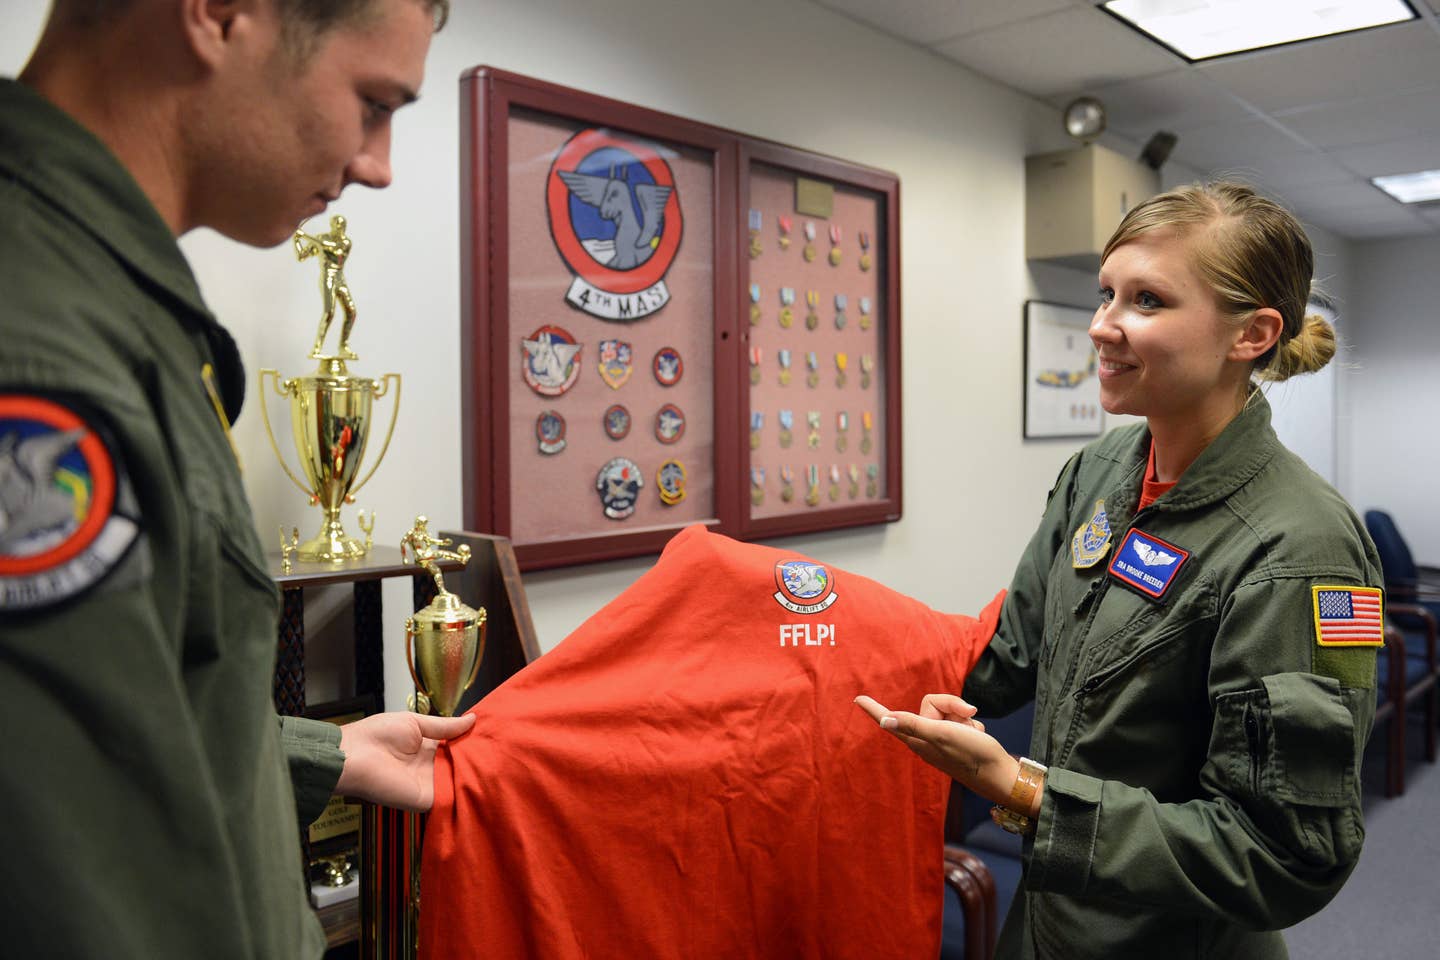 And then he said that these shirts were going away! Crazy, right?! (USAF photo by Airman 1st Class Jacob Jiminez)